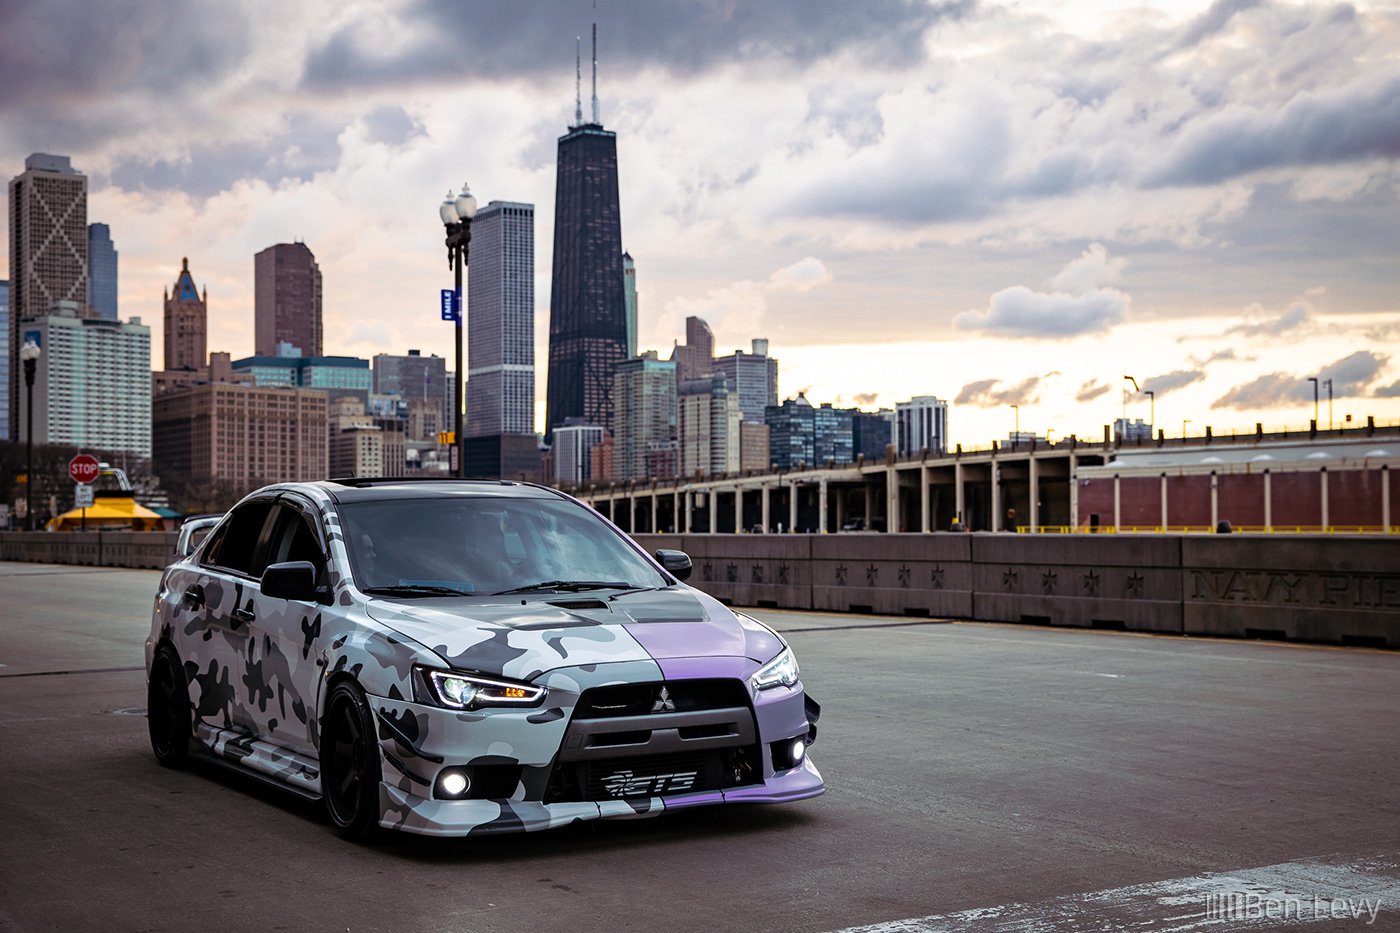 Camouflage and purple Lancer Evolution against the Chicago Skyline